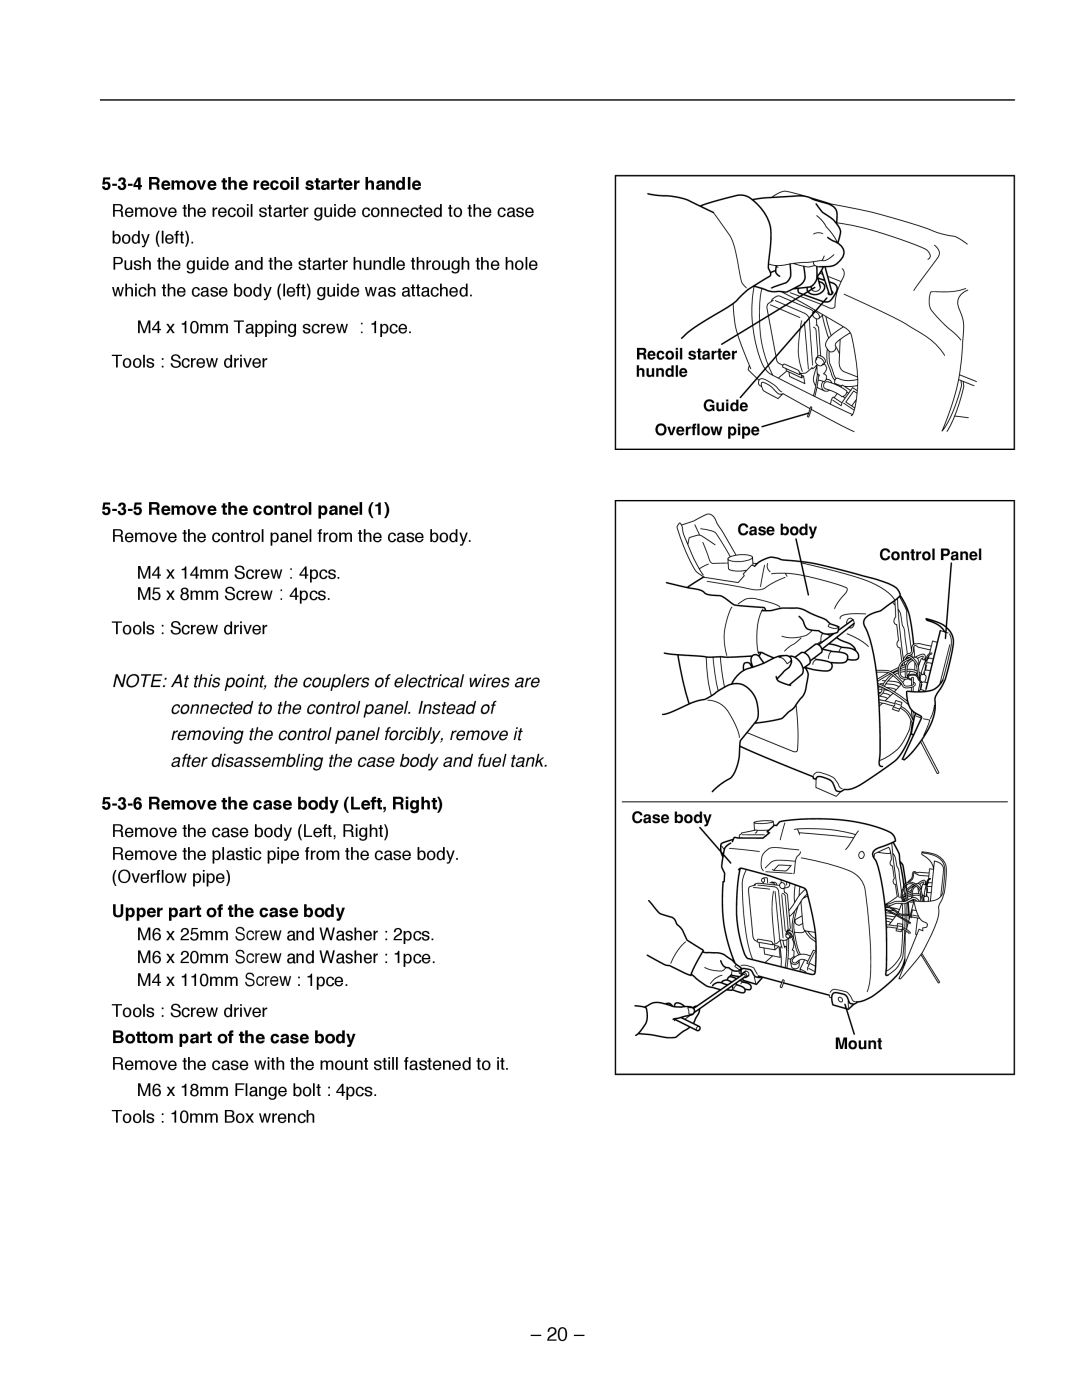 Subaru Robin Power Products R1700i service manual 5-3-4Remove the recoil starter handle, 5-3-5Remove the control panel 